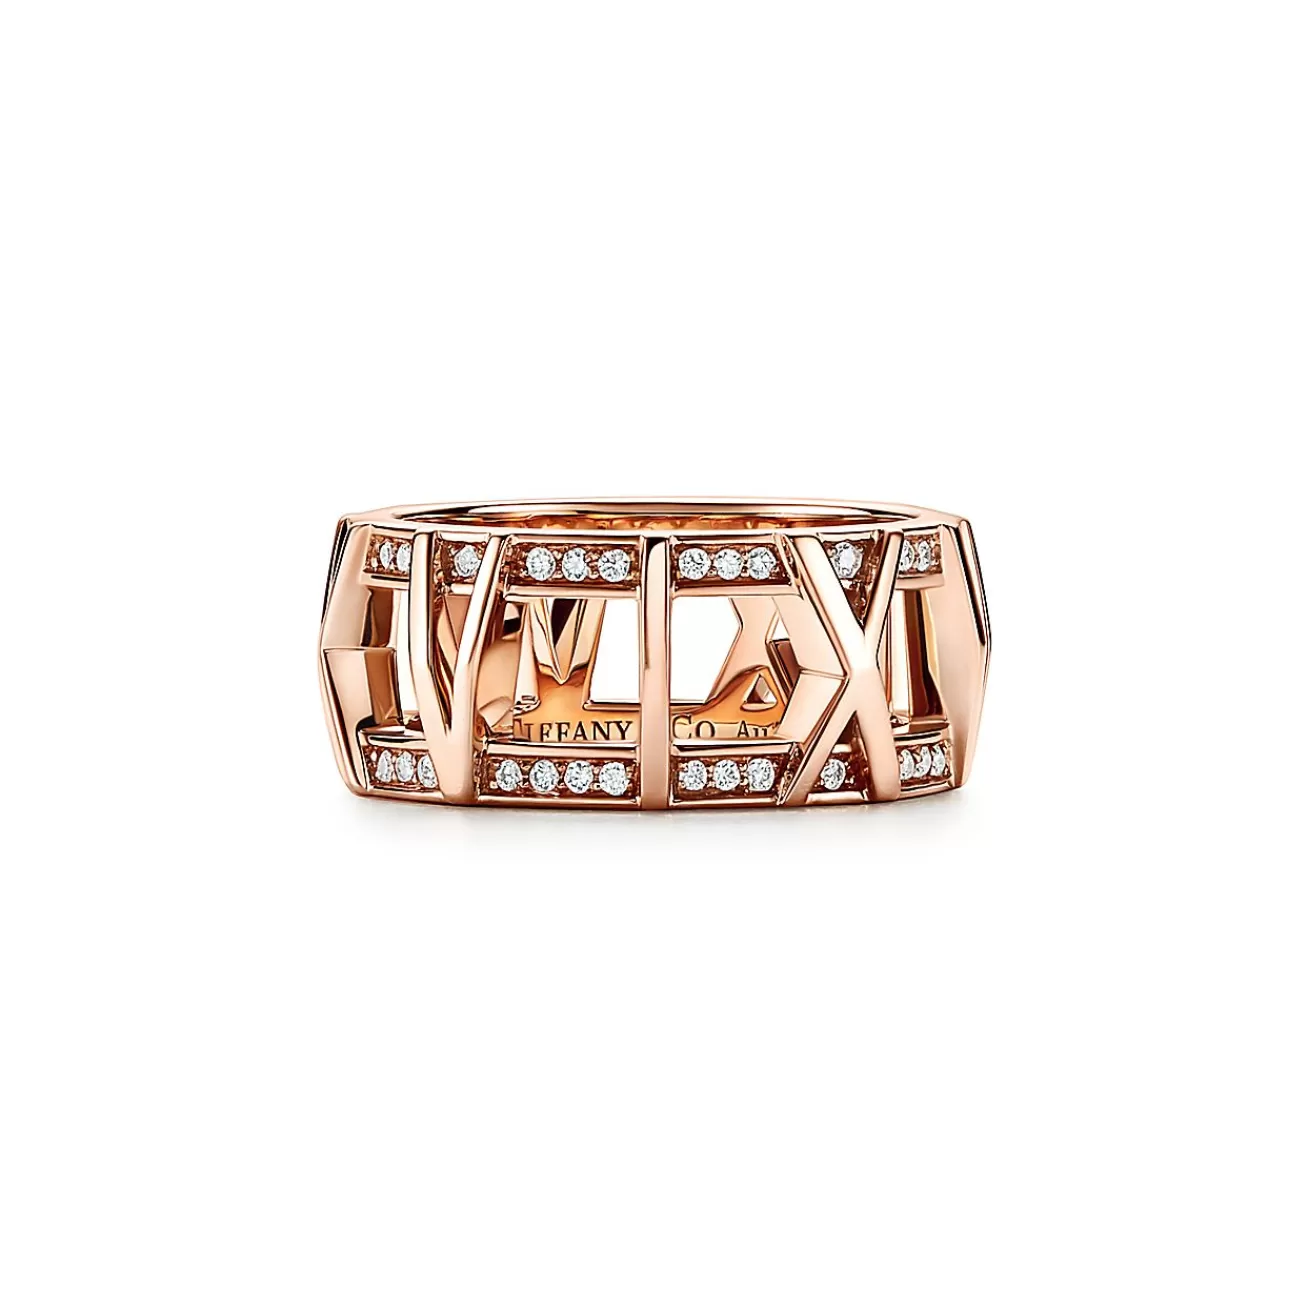 Tiffany & Co. Atlas® X Open Ring in Rose Gold with Diamonds, 8.8 mm Wide | ^ Rose Gold Jewelry | Diamond Jewelry